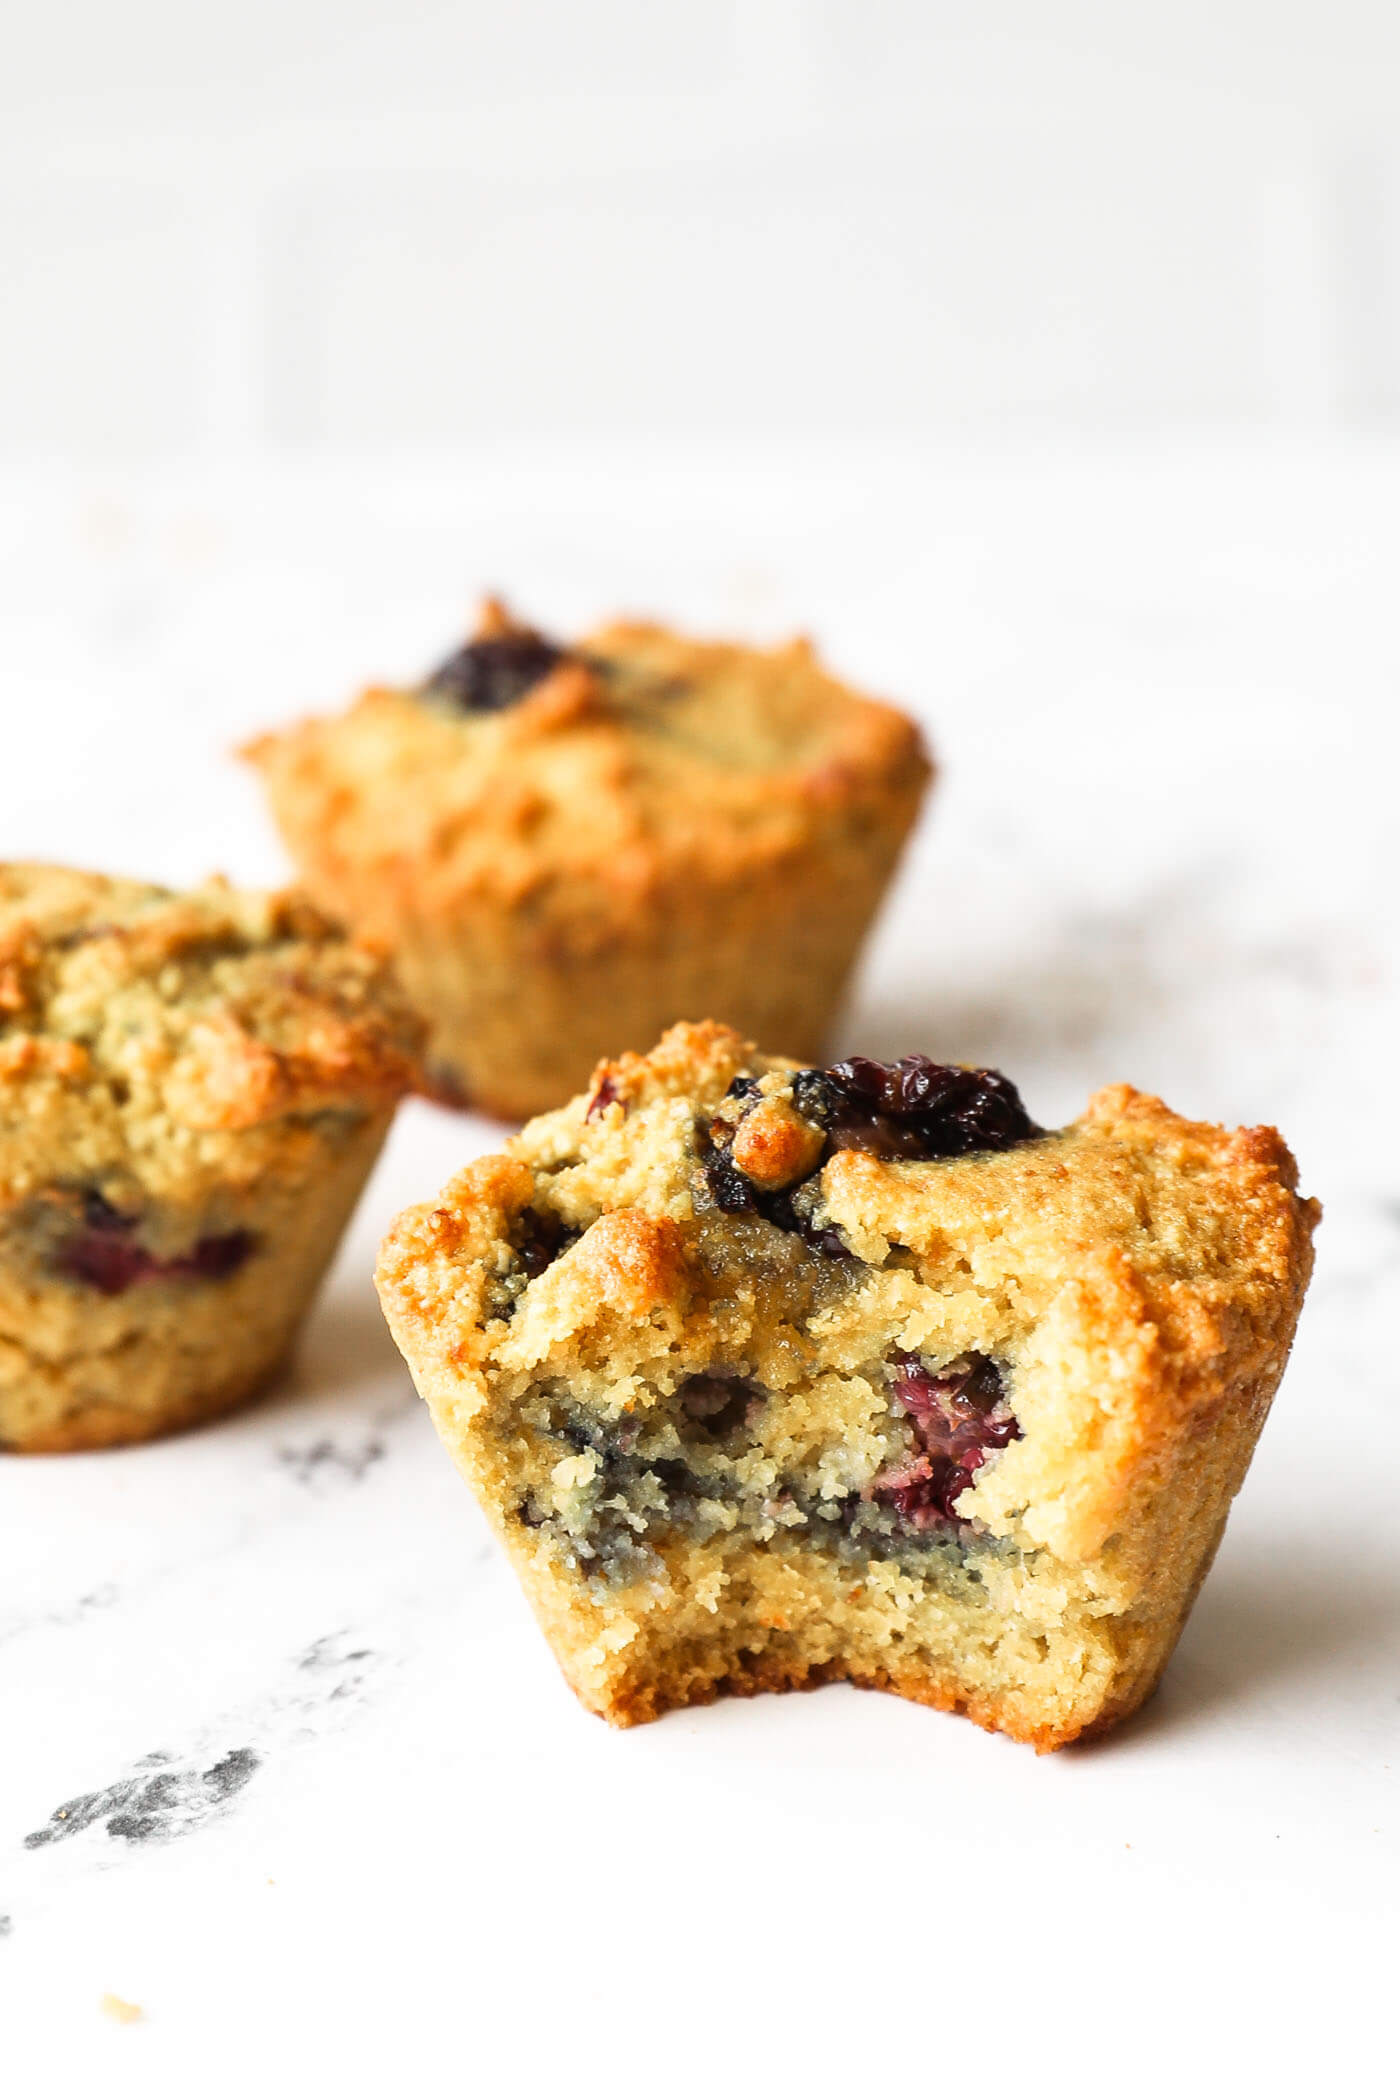 Image of three gluten free blackberry muffins on table. One muffin has a bite taken out of it.